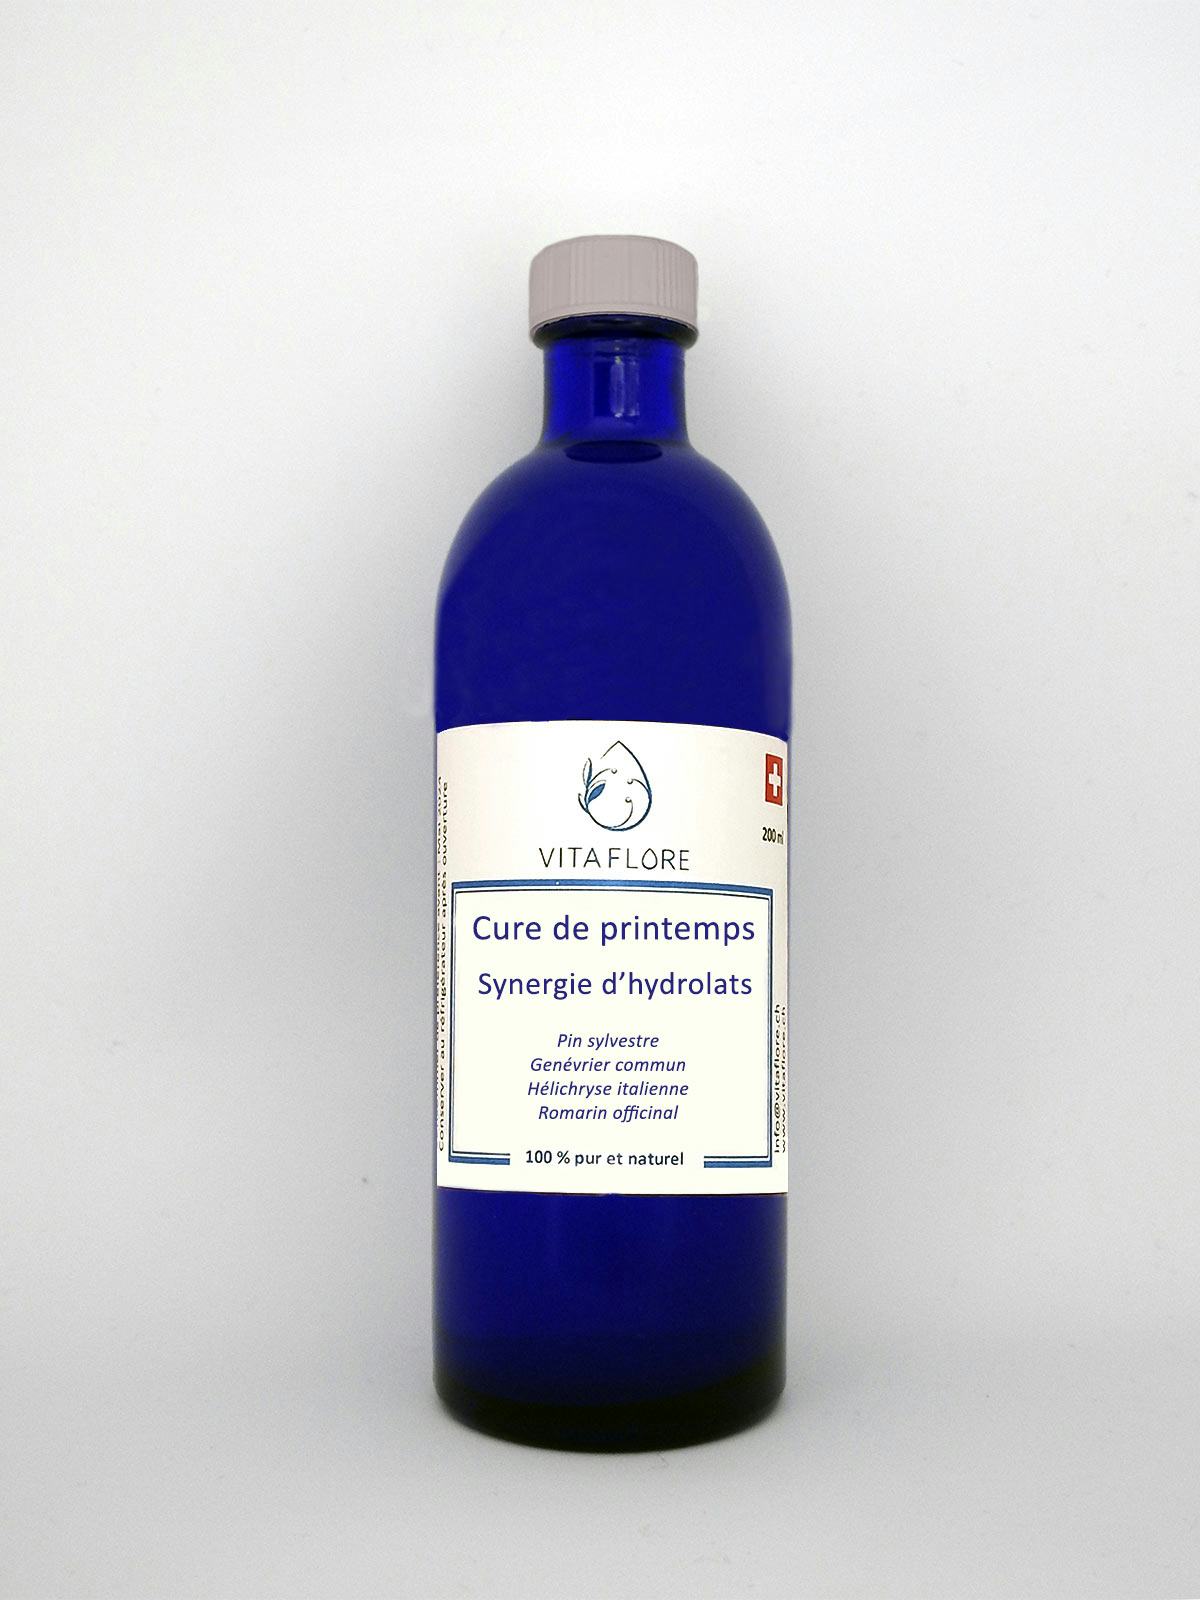 Synergie d’hydrolats – Cure de printemps, artisanal product for direct sale in Switzerland